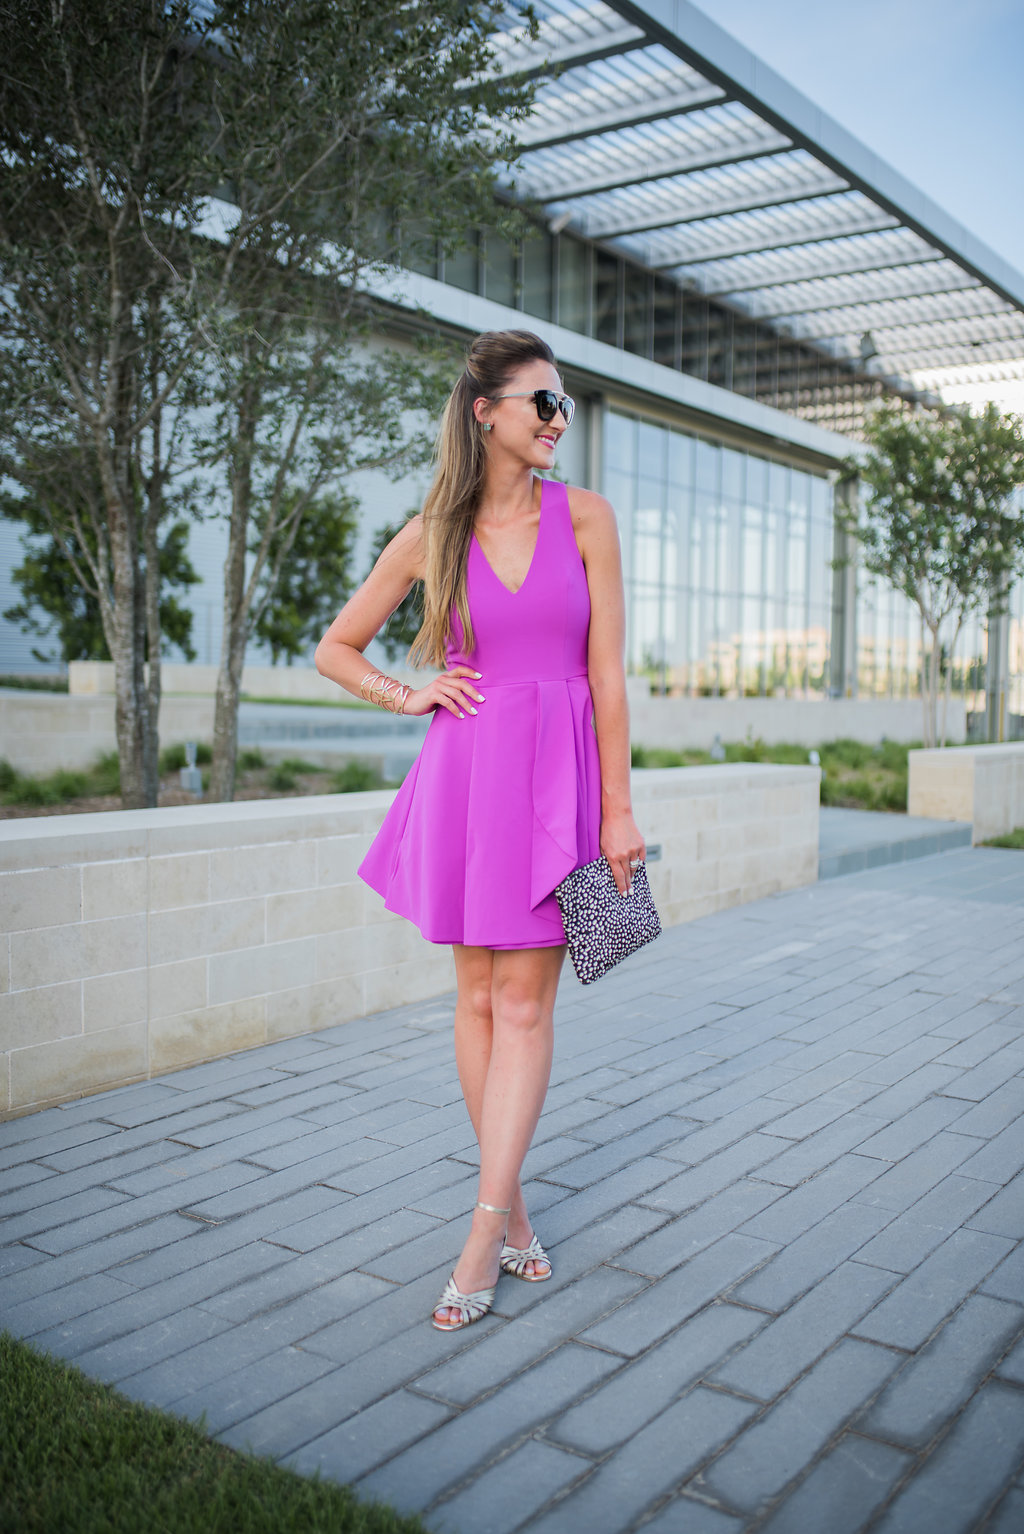 What to wear to a Summer wedding - A Summer Wedding Guest Outfit With Trunk Club featured by popular Texas fashion blogger, Style Your Senses - A Summer Wedding Guest Outfit With Trunk Club featured by popular Texas fashion blogger, Style Your Senses